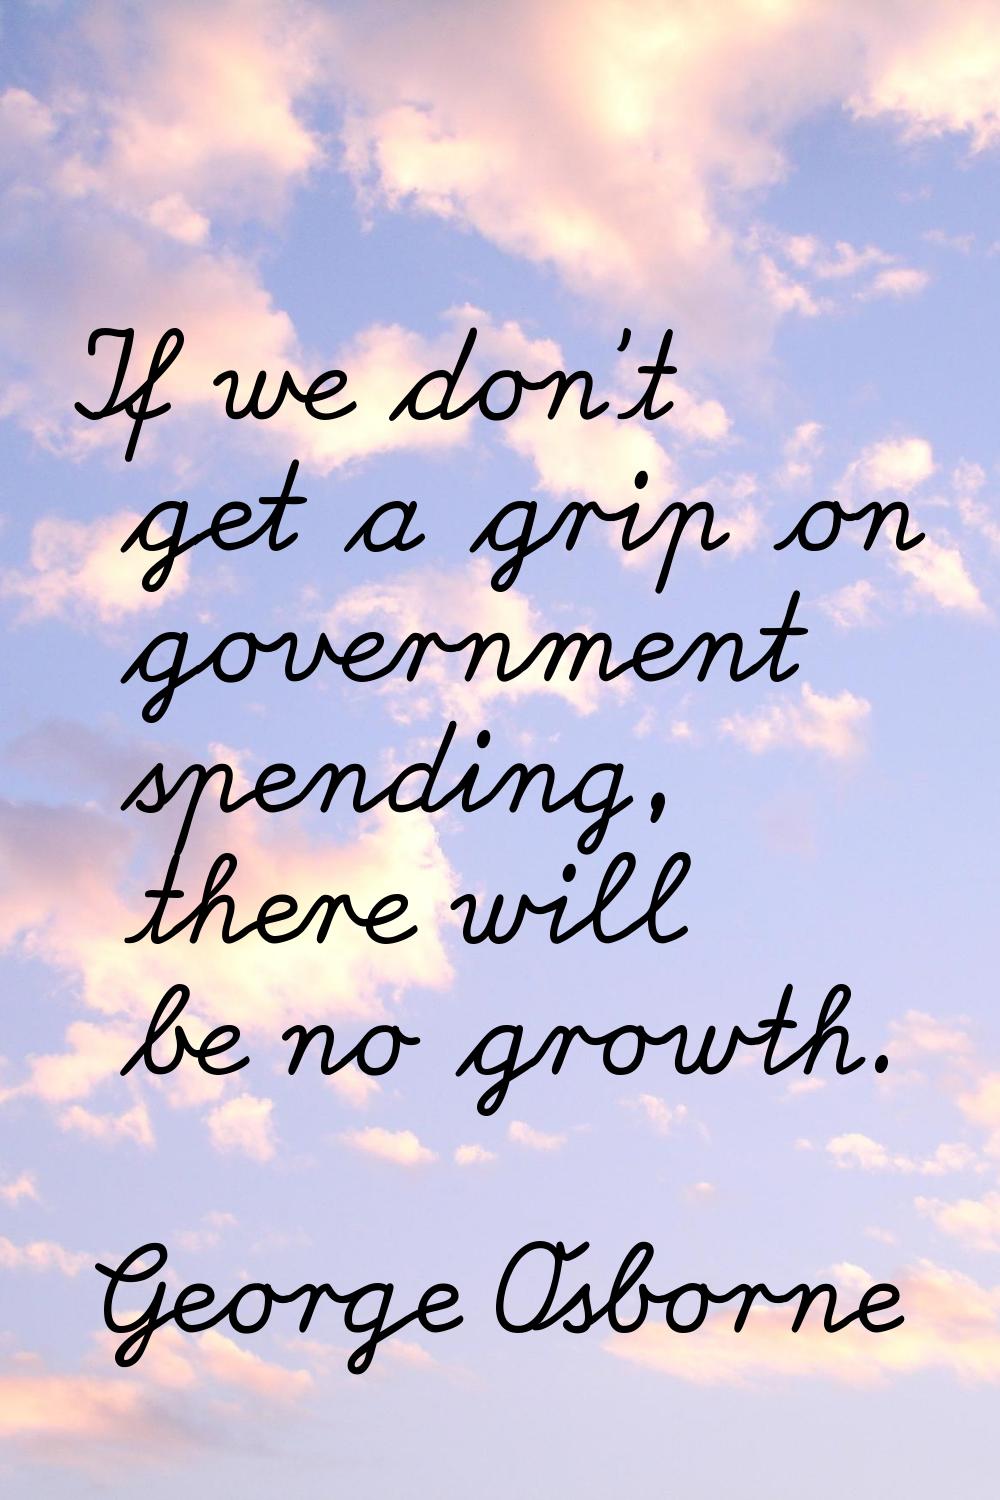 If we don't get a grip on government spending, there will be no growth.